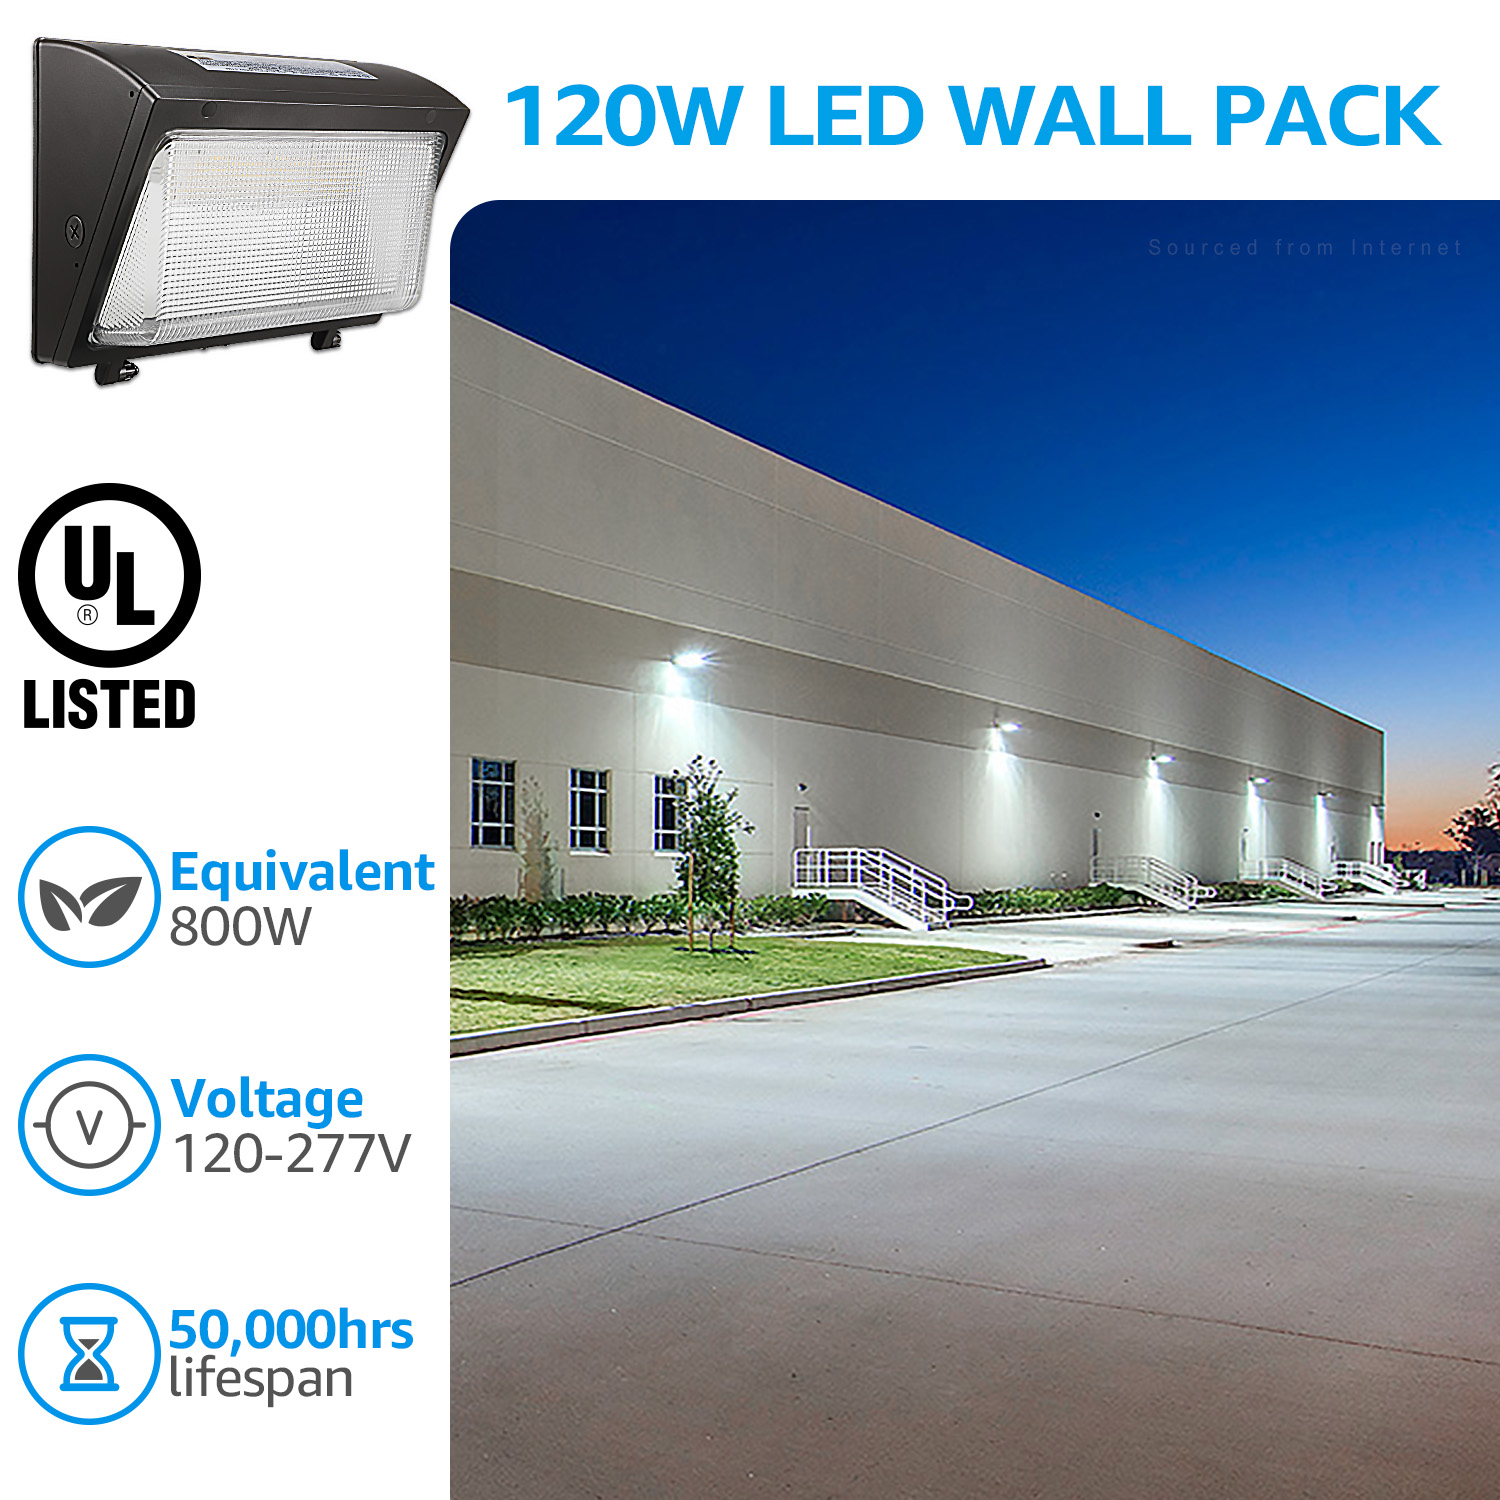 LEONLITE LED Wall Pack Light, 120W(800W Eqv.), 0-10V Dimmable Commercial LED Wall Pack, IP65 Waterproof, 5000K Daylight, Outdoor LED Wall Pack for Garage, Factories, Warehouses, Pack of 4 - image 2 of 7